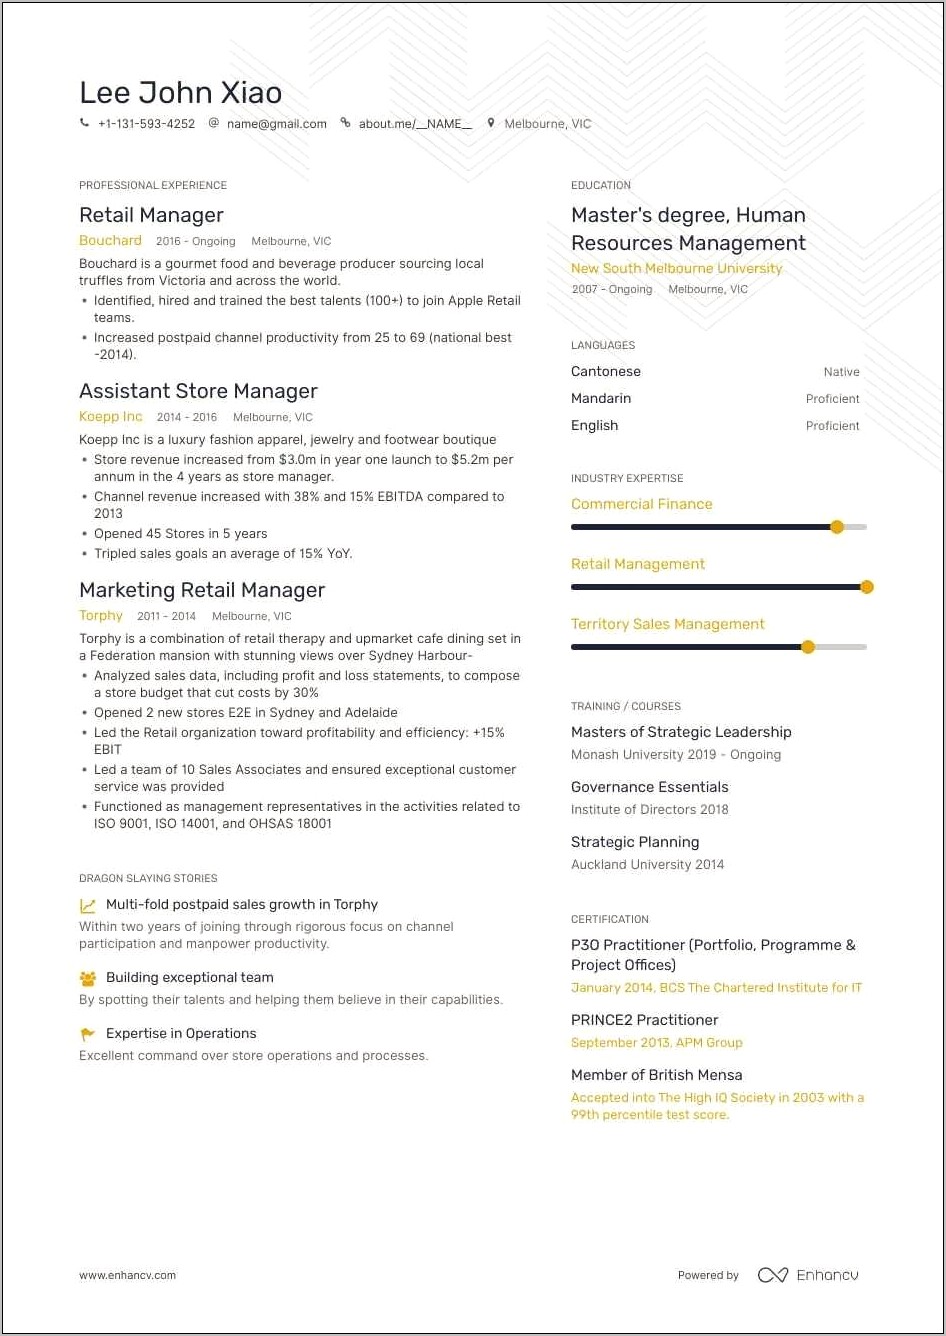 Resume Words For Restaurant Assistant Managers